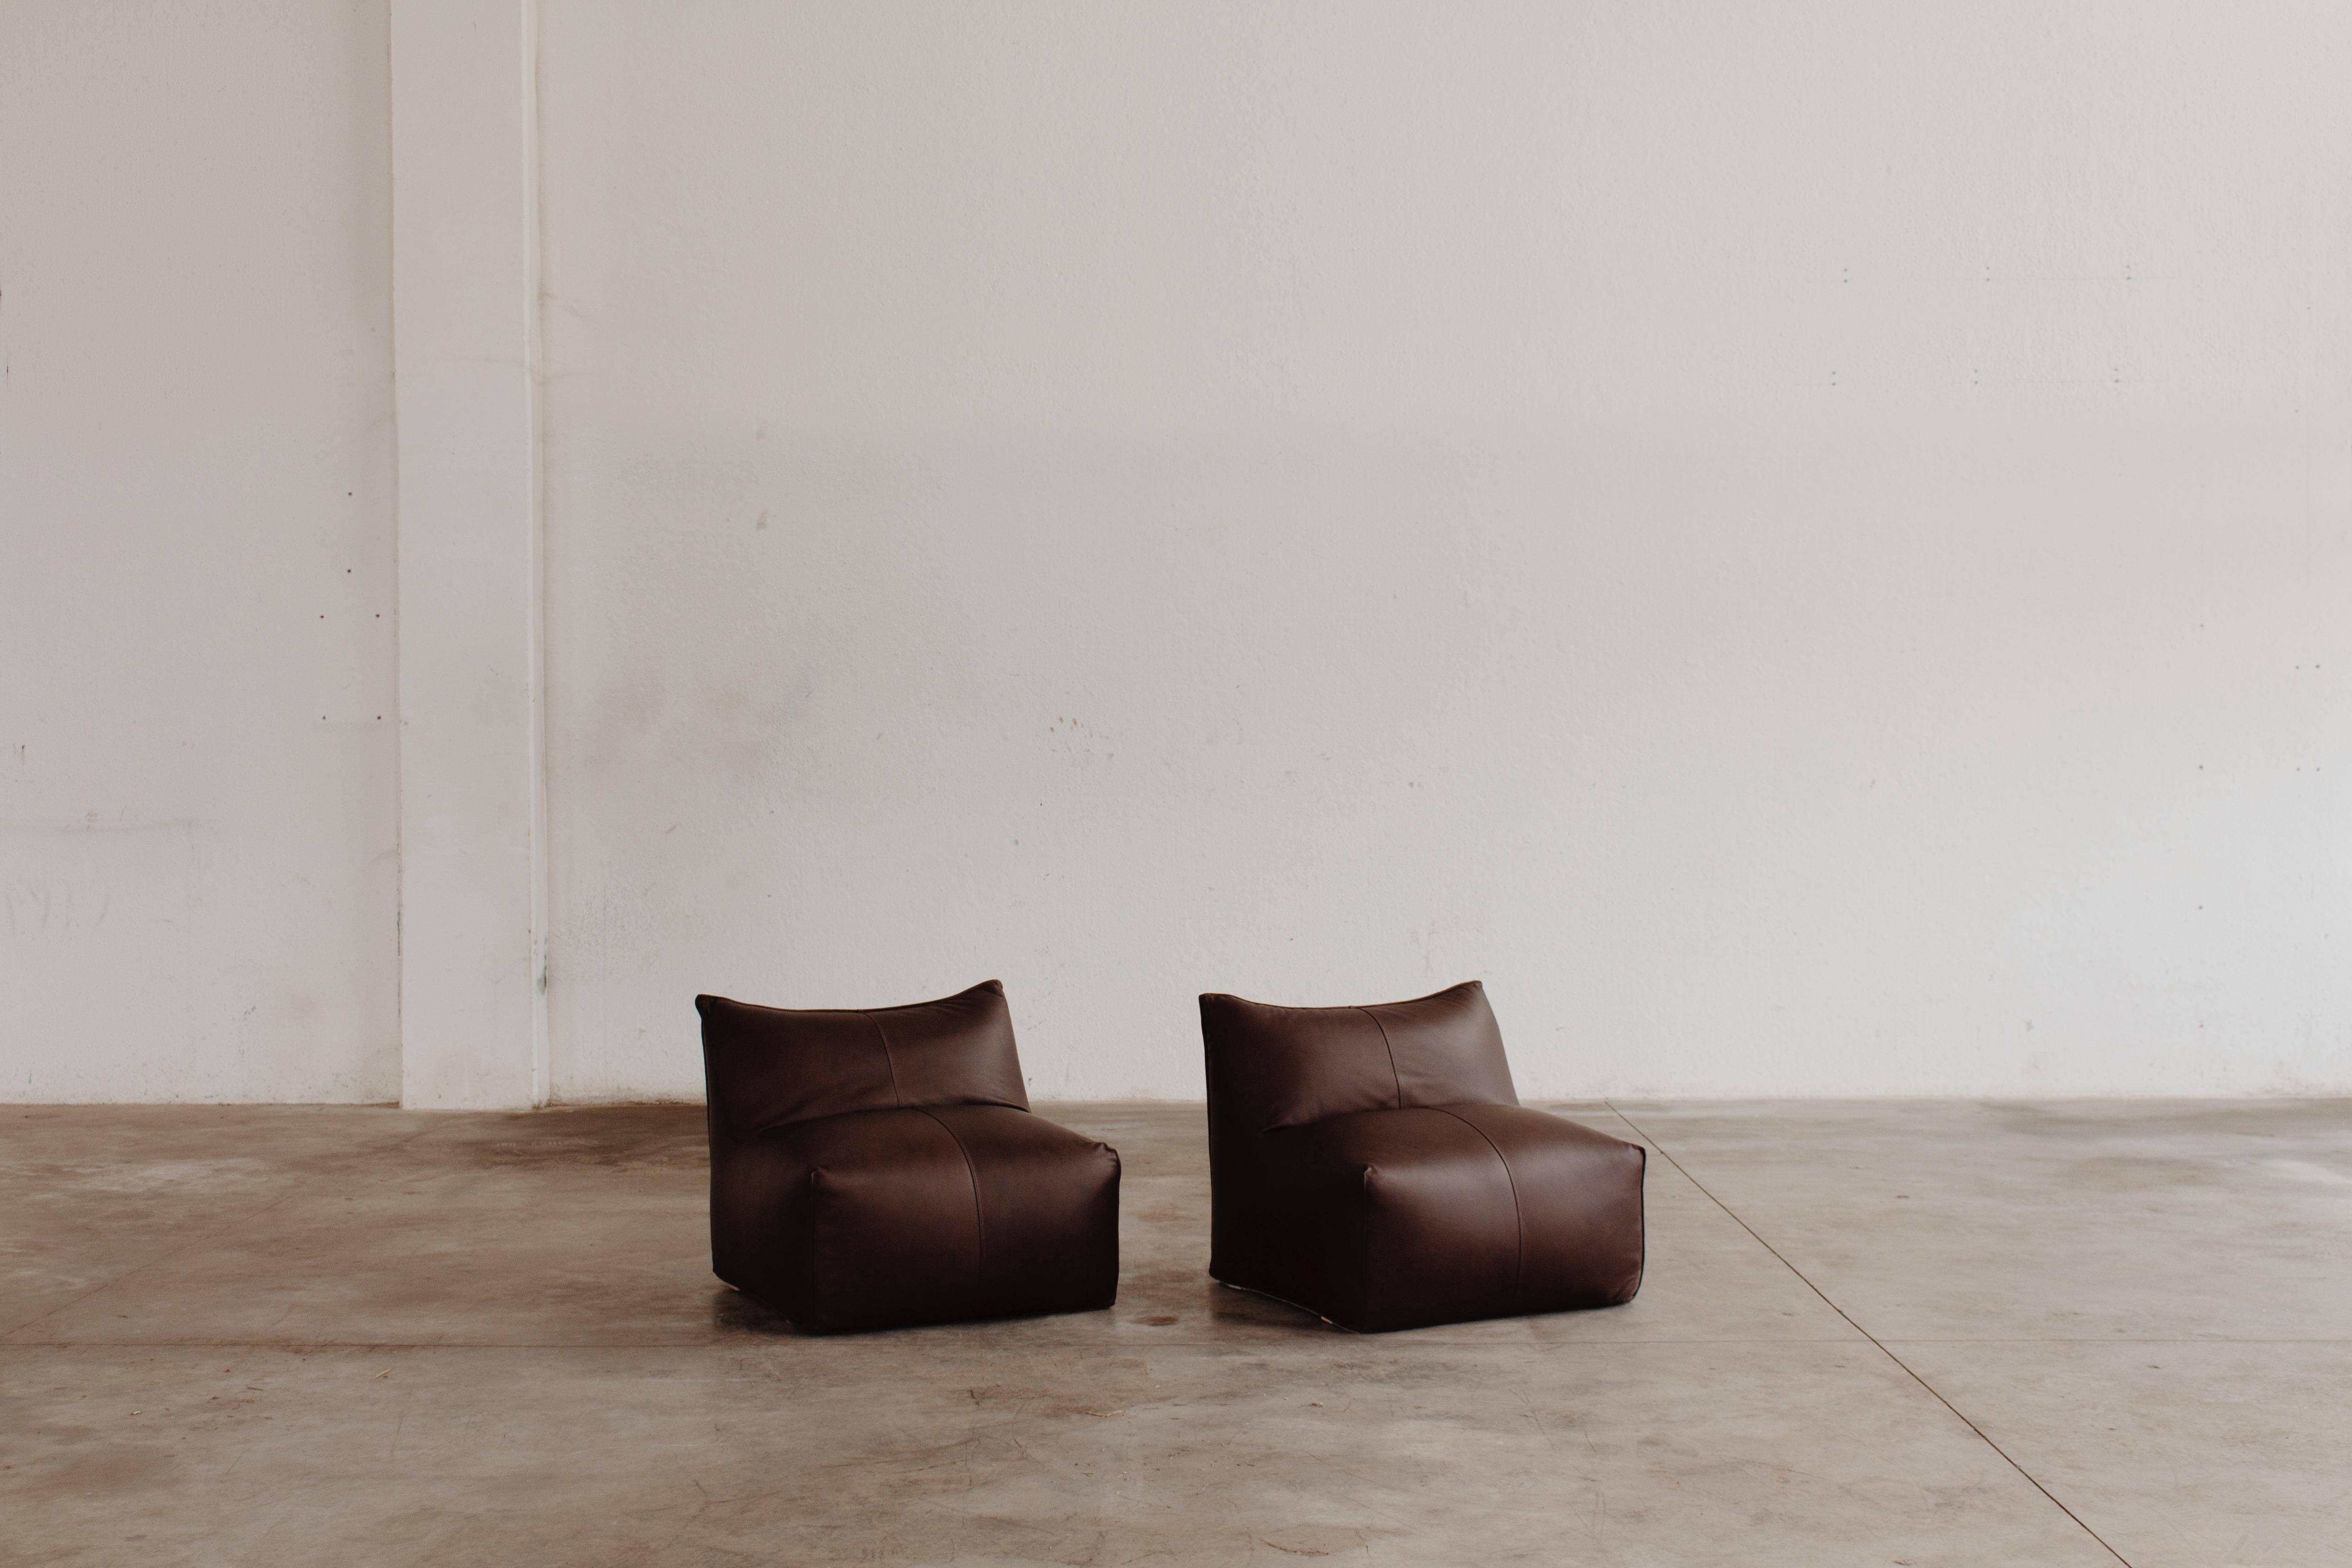 Mario Bellini “Le Bambole” chairs for B&B Italia, brown leather and foam, Italy, 1971, set of two.

The search for a new shape for upholstered furniture: all parts are shaped like a large soft cushion. If we take apart 